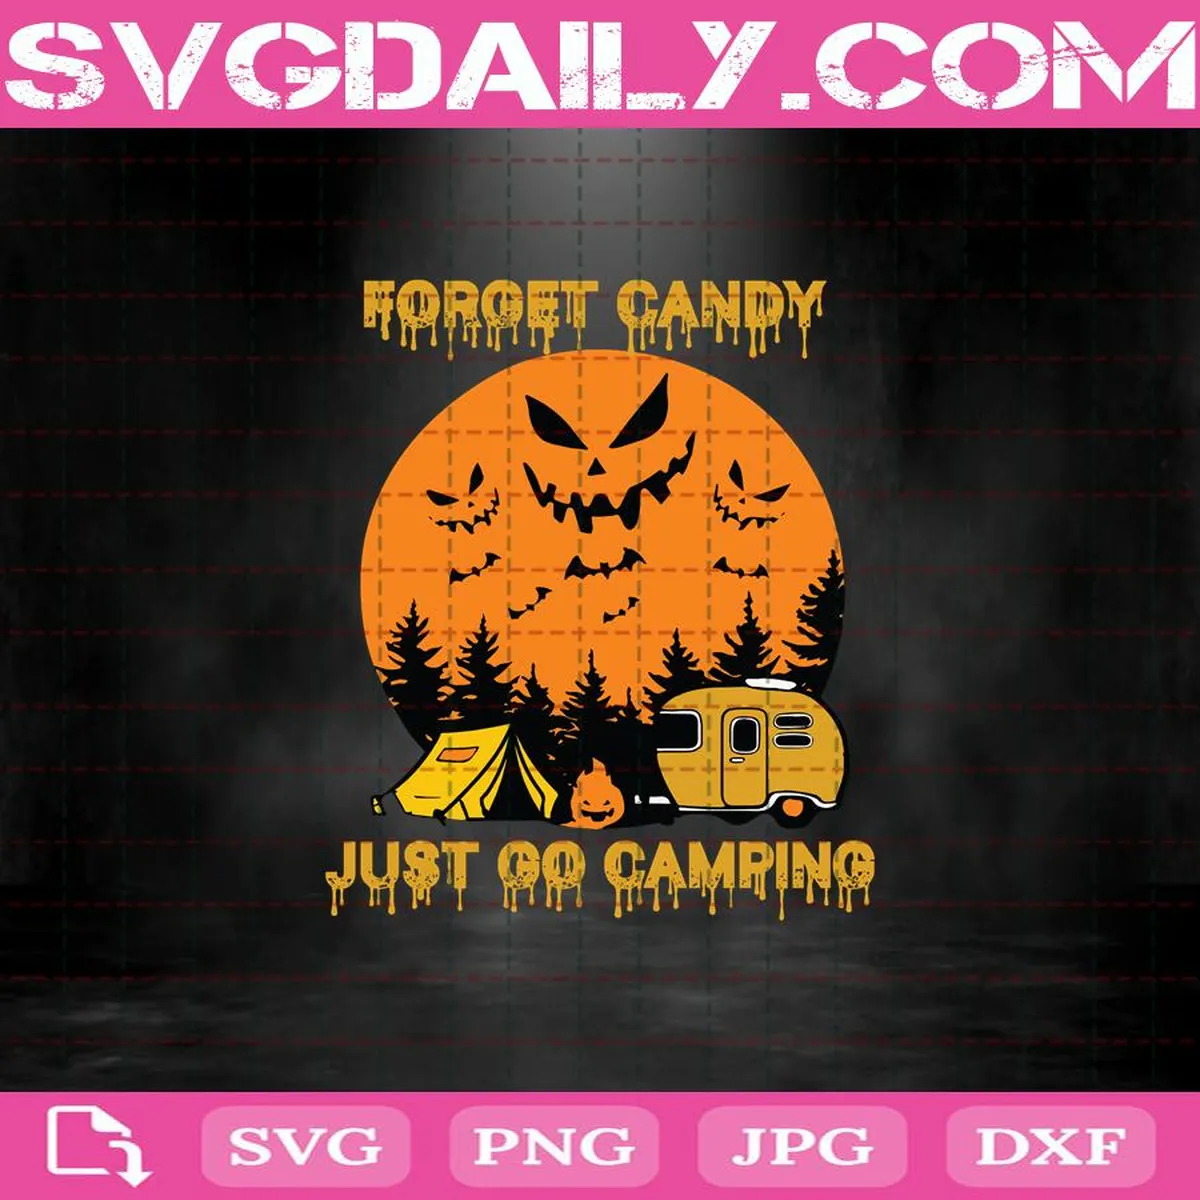 Foroet Candy Just Go Camring Svg, Halloween Camping Svg, Halloween Moon Svg, Nightmare Svg, Camp Svg, Camping Svg, Halloween Svg